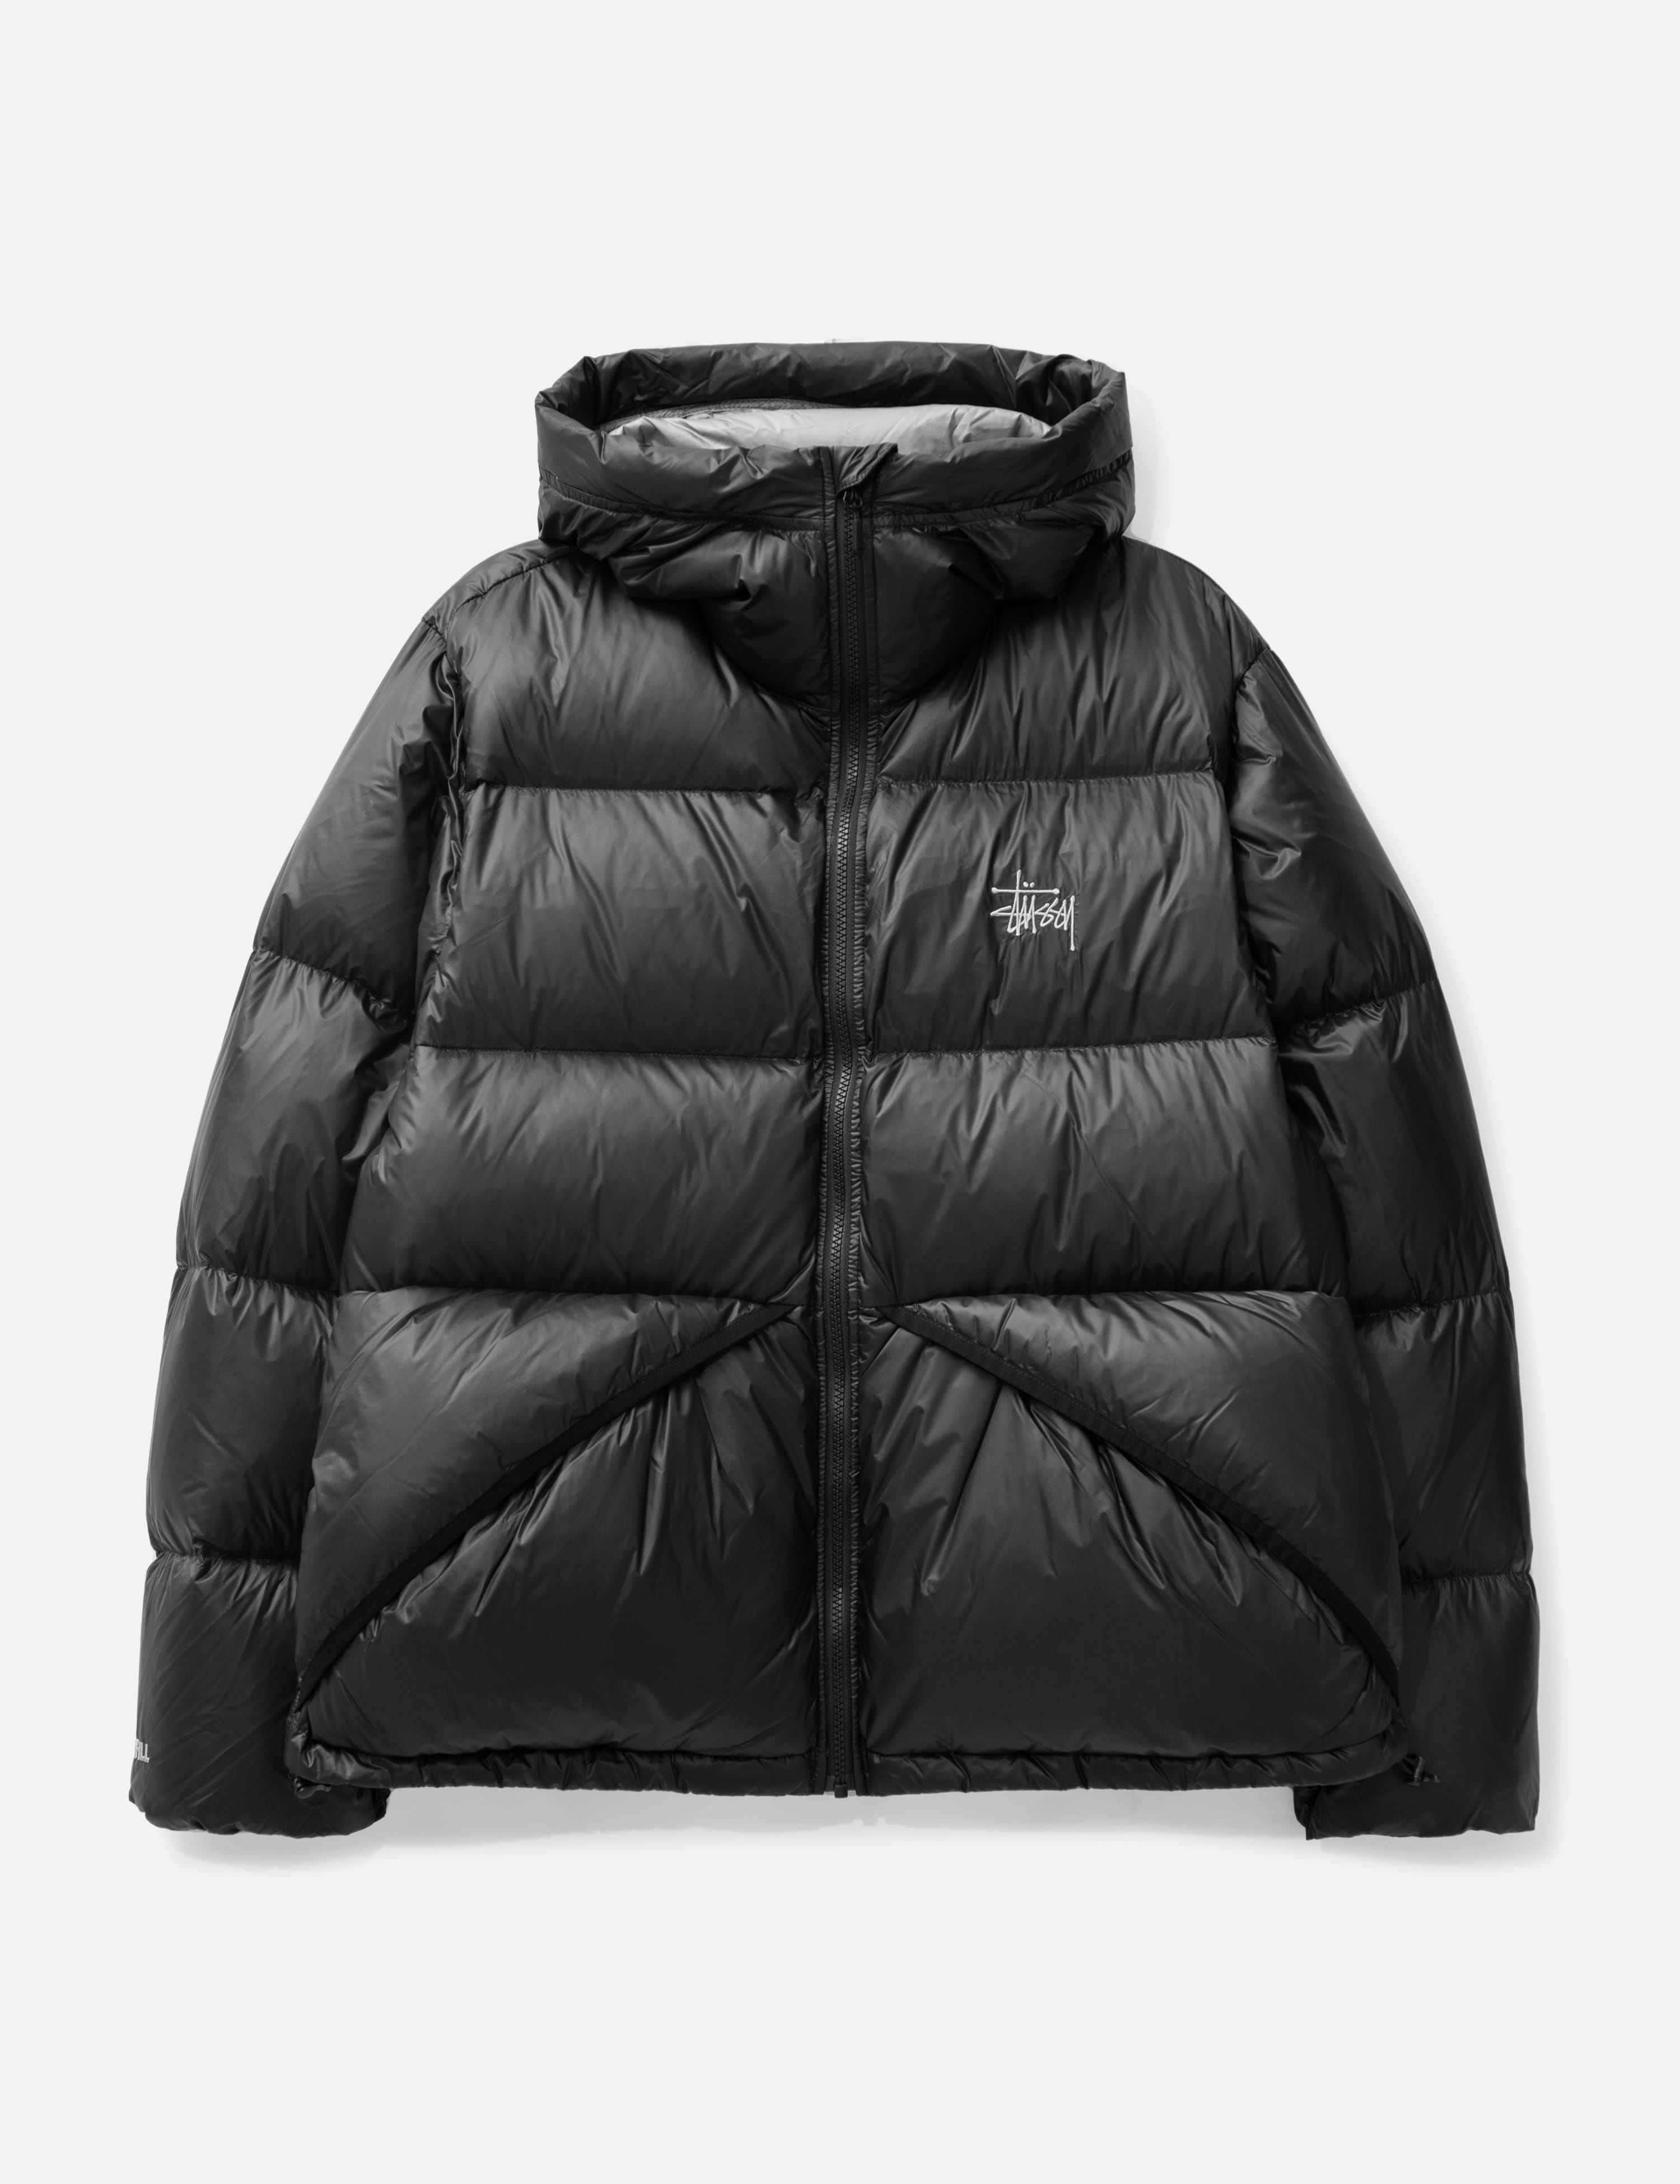 Jackets | HBX - Globally Curated Fashion and Lifestyle by Hypebeast